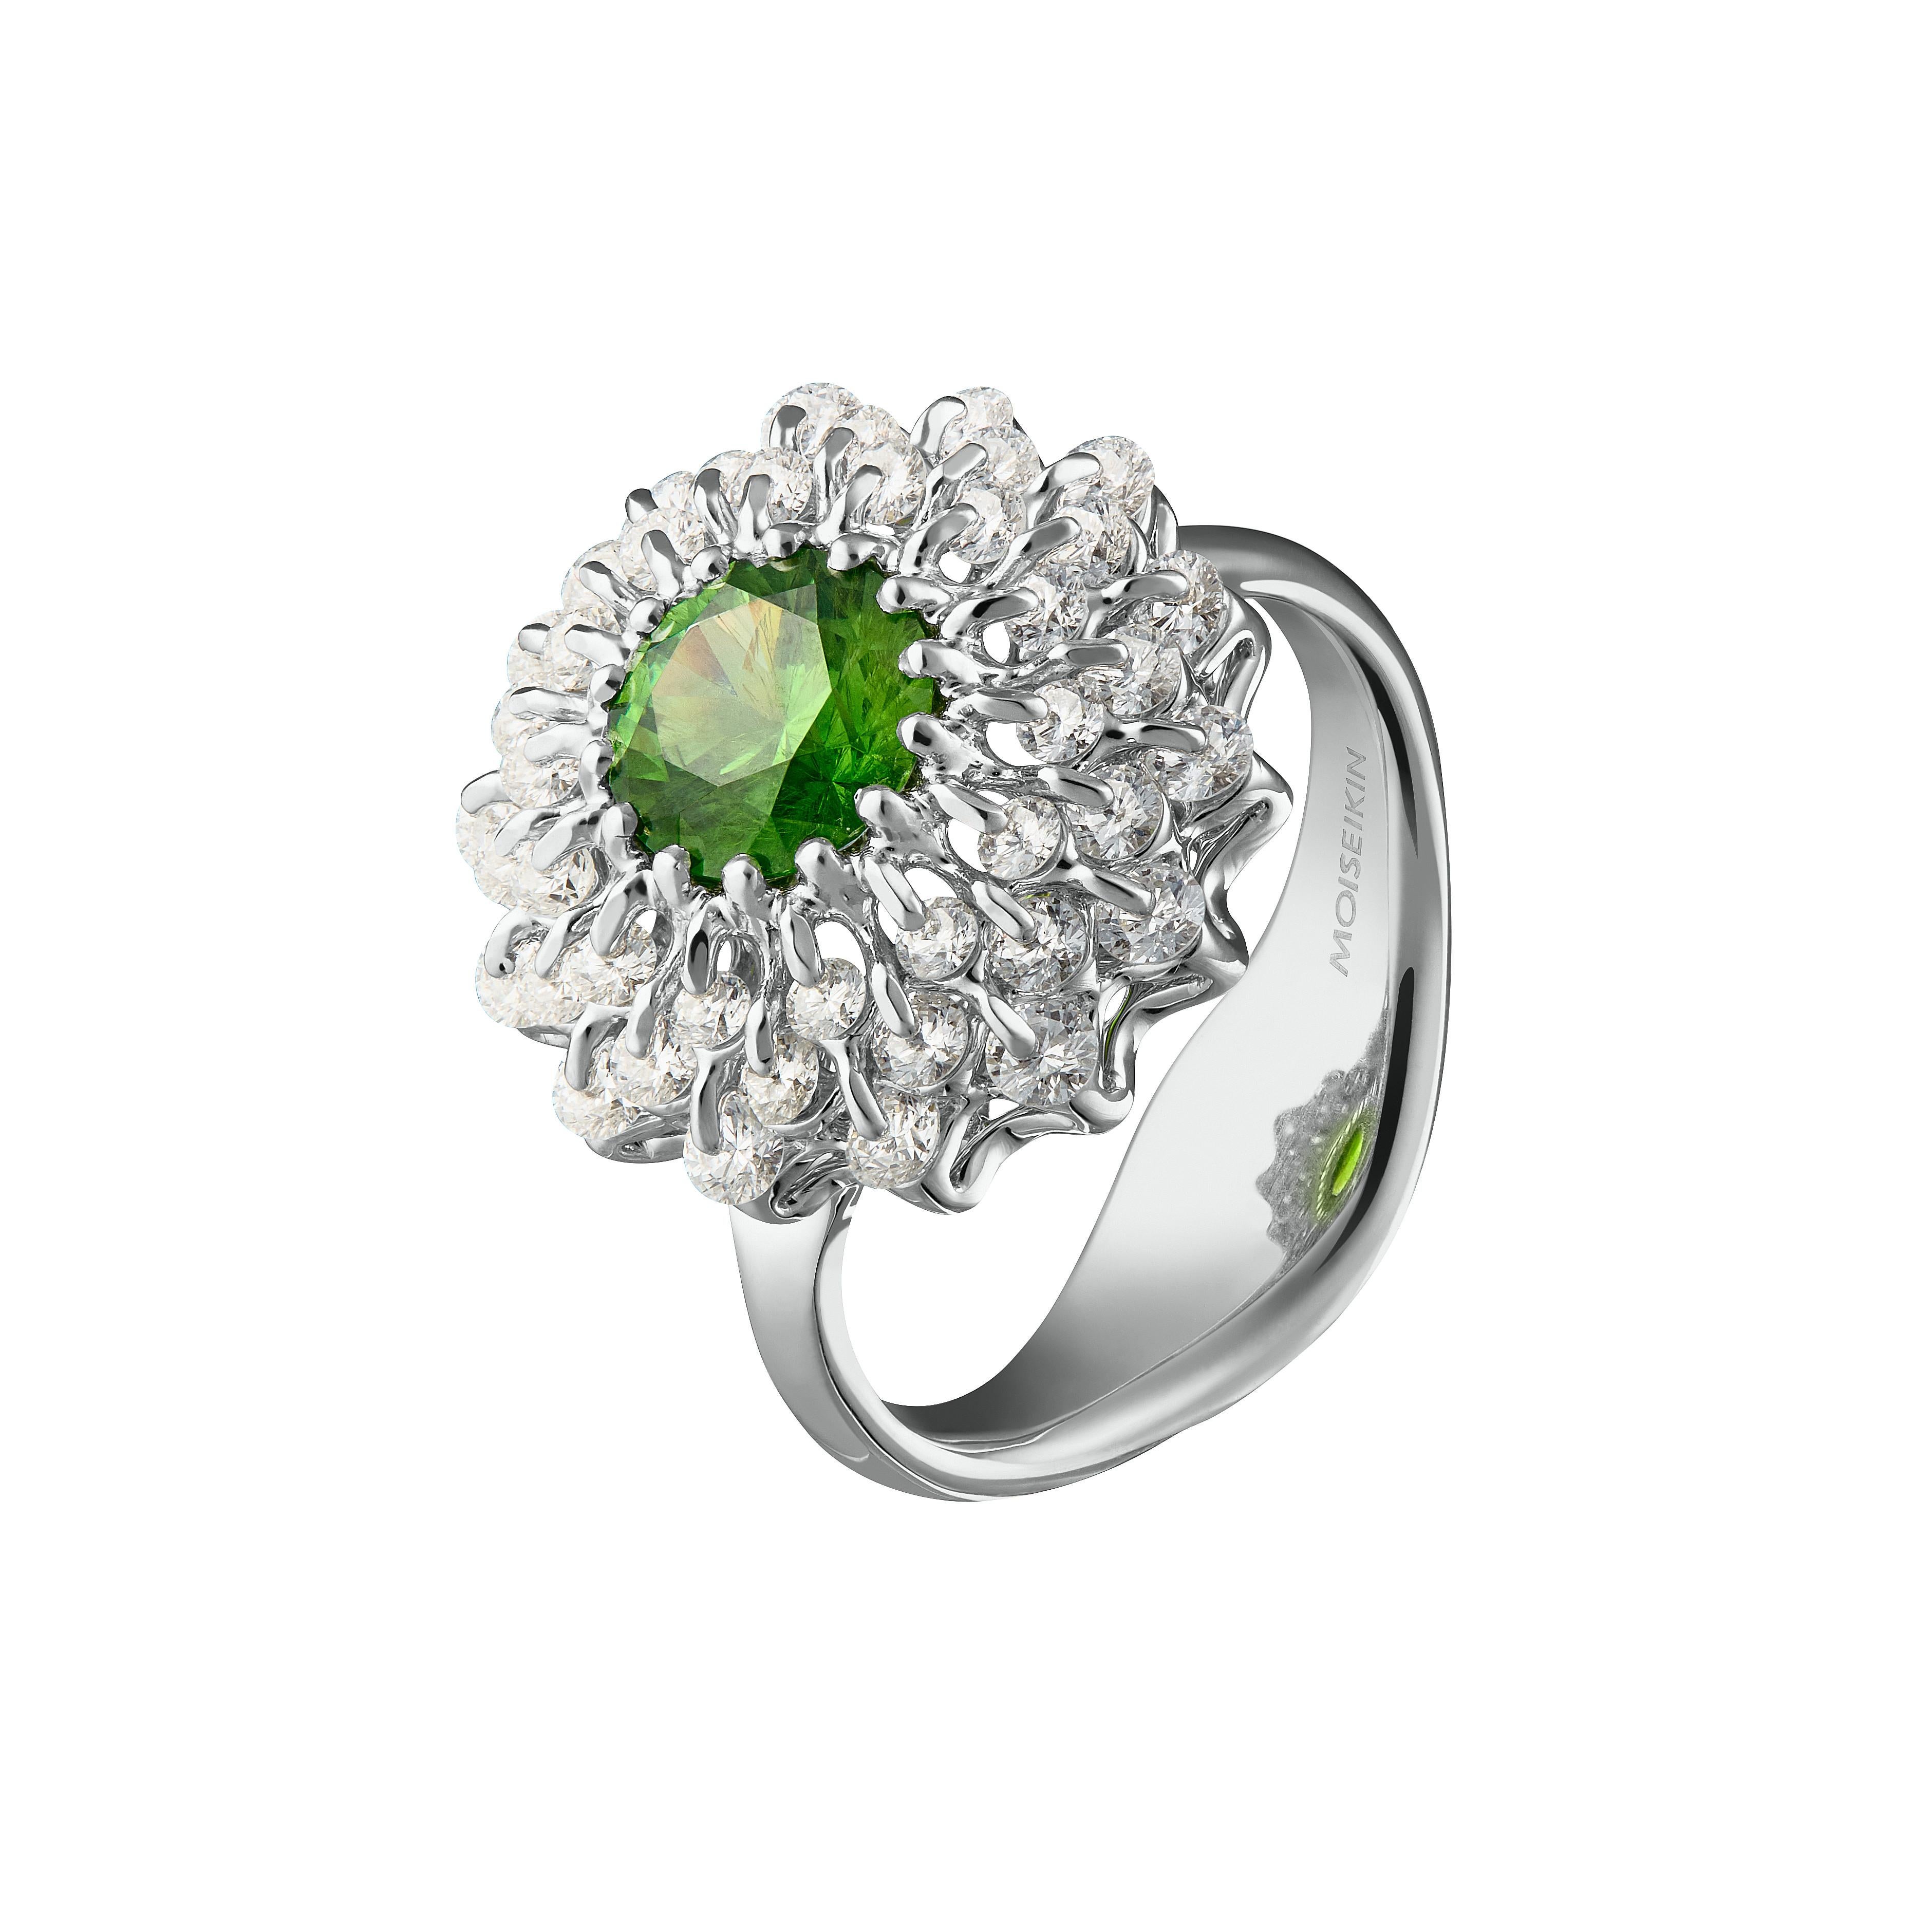 1.38ct Russian Demantoid Garnet is mounted in the innovative diamond jewellery design inspired by famous ballet. 

Internationally patented, Waltzing Brilliance technology is an innovative jewellery invention patented by a leading Russian designer,